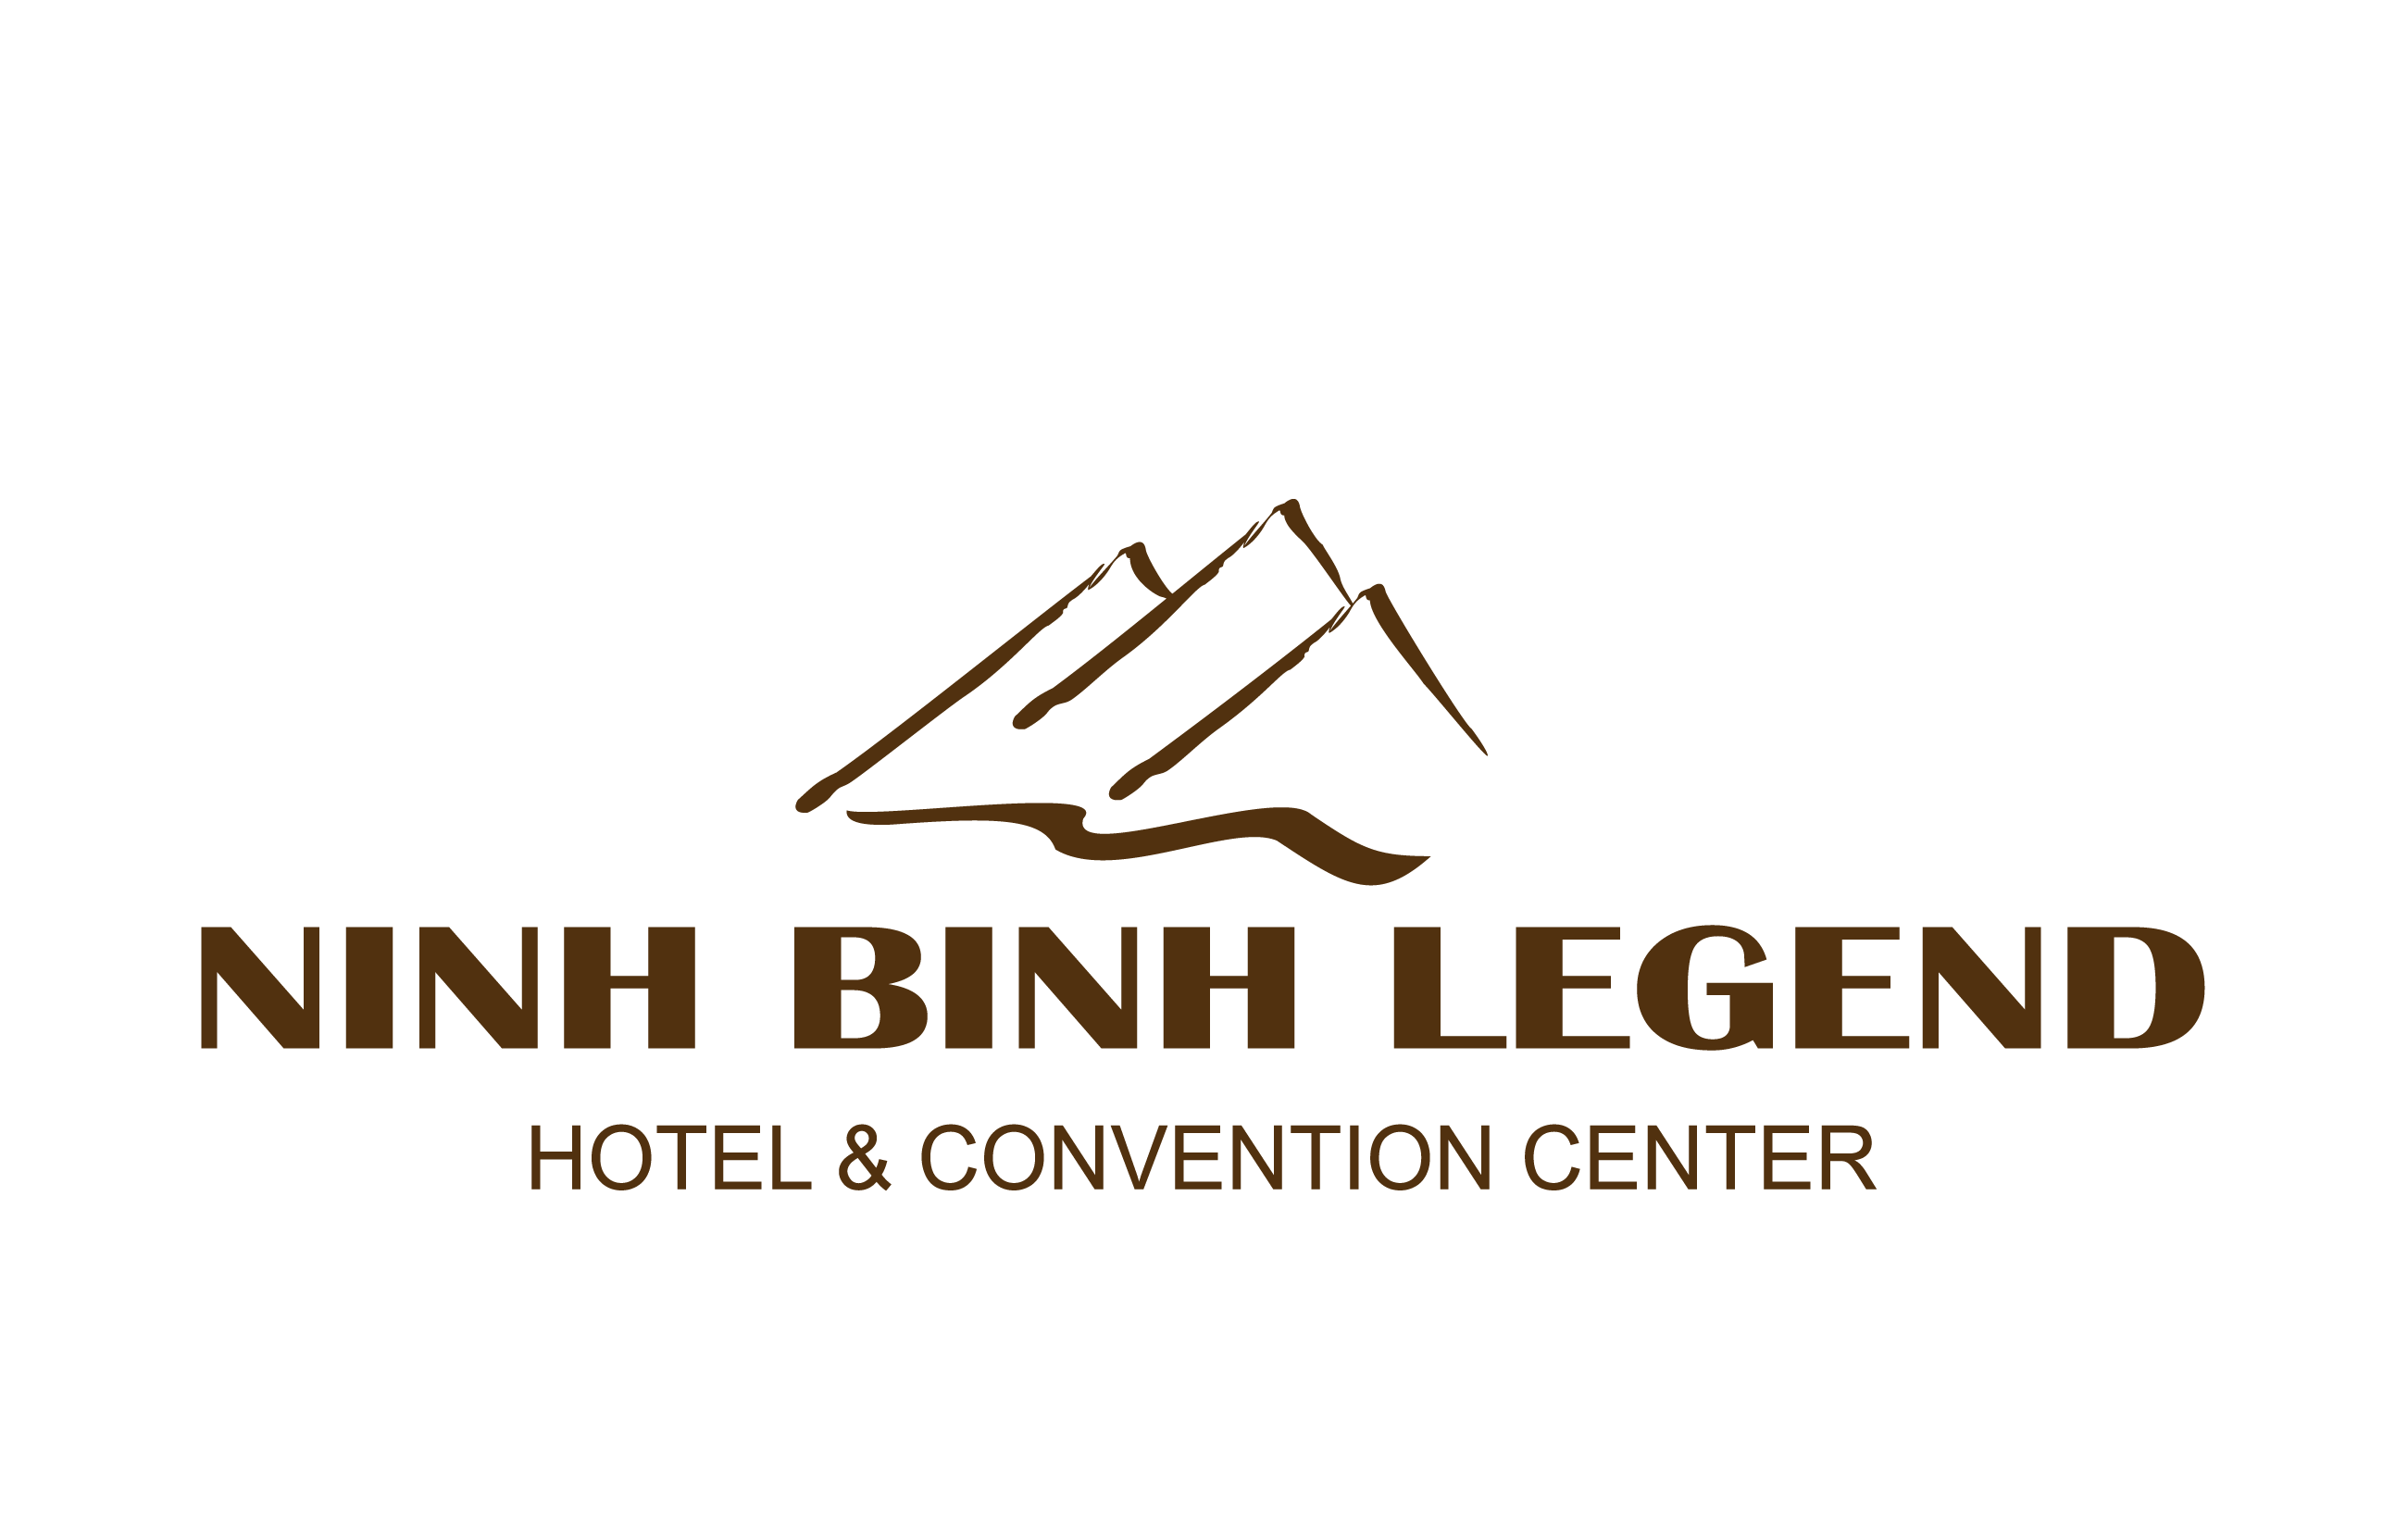 THUY ANH NINH BINH LEGEND HOTELS COMPANY LIMITED